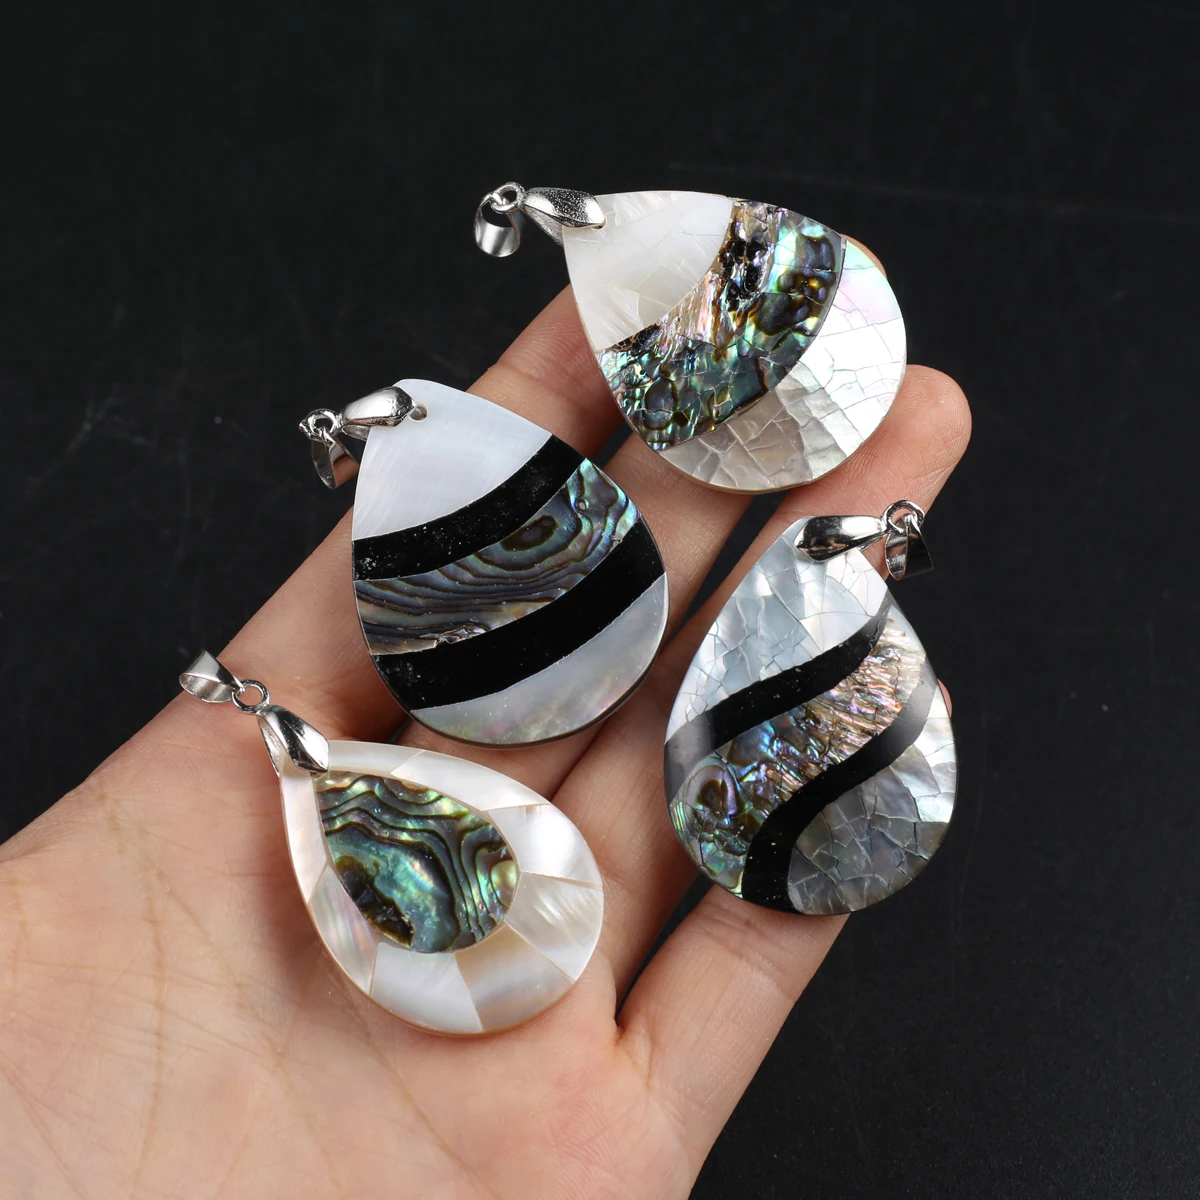 

1Pcs Random Shell Pendant Natural The Mother Of Pearl Drop-Shaped Splicing Pendant For jewelry making DIY Necklace Accessory